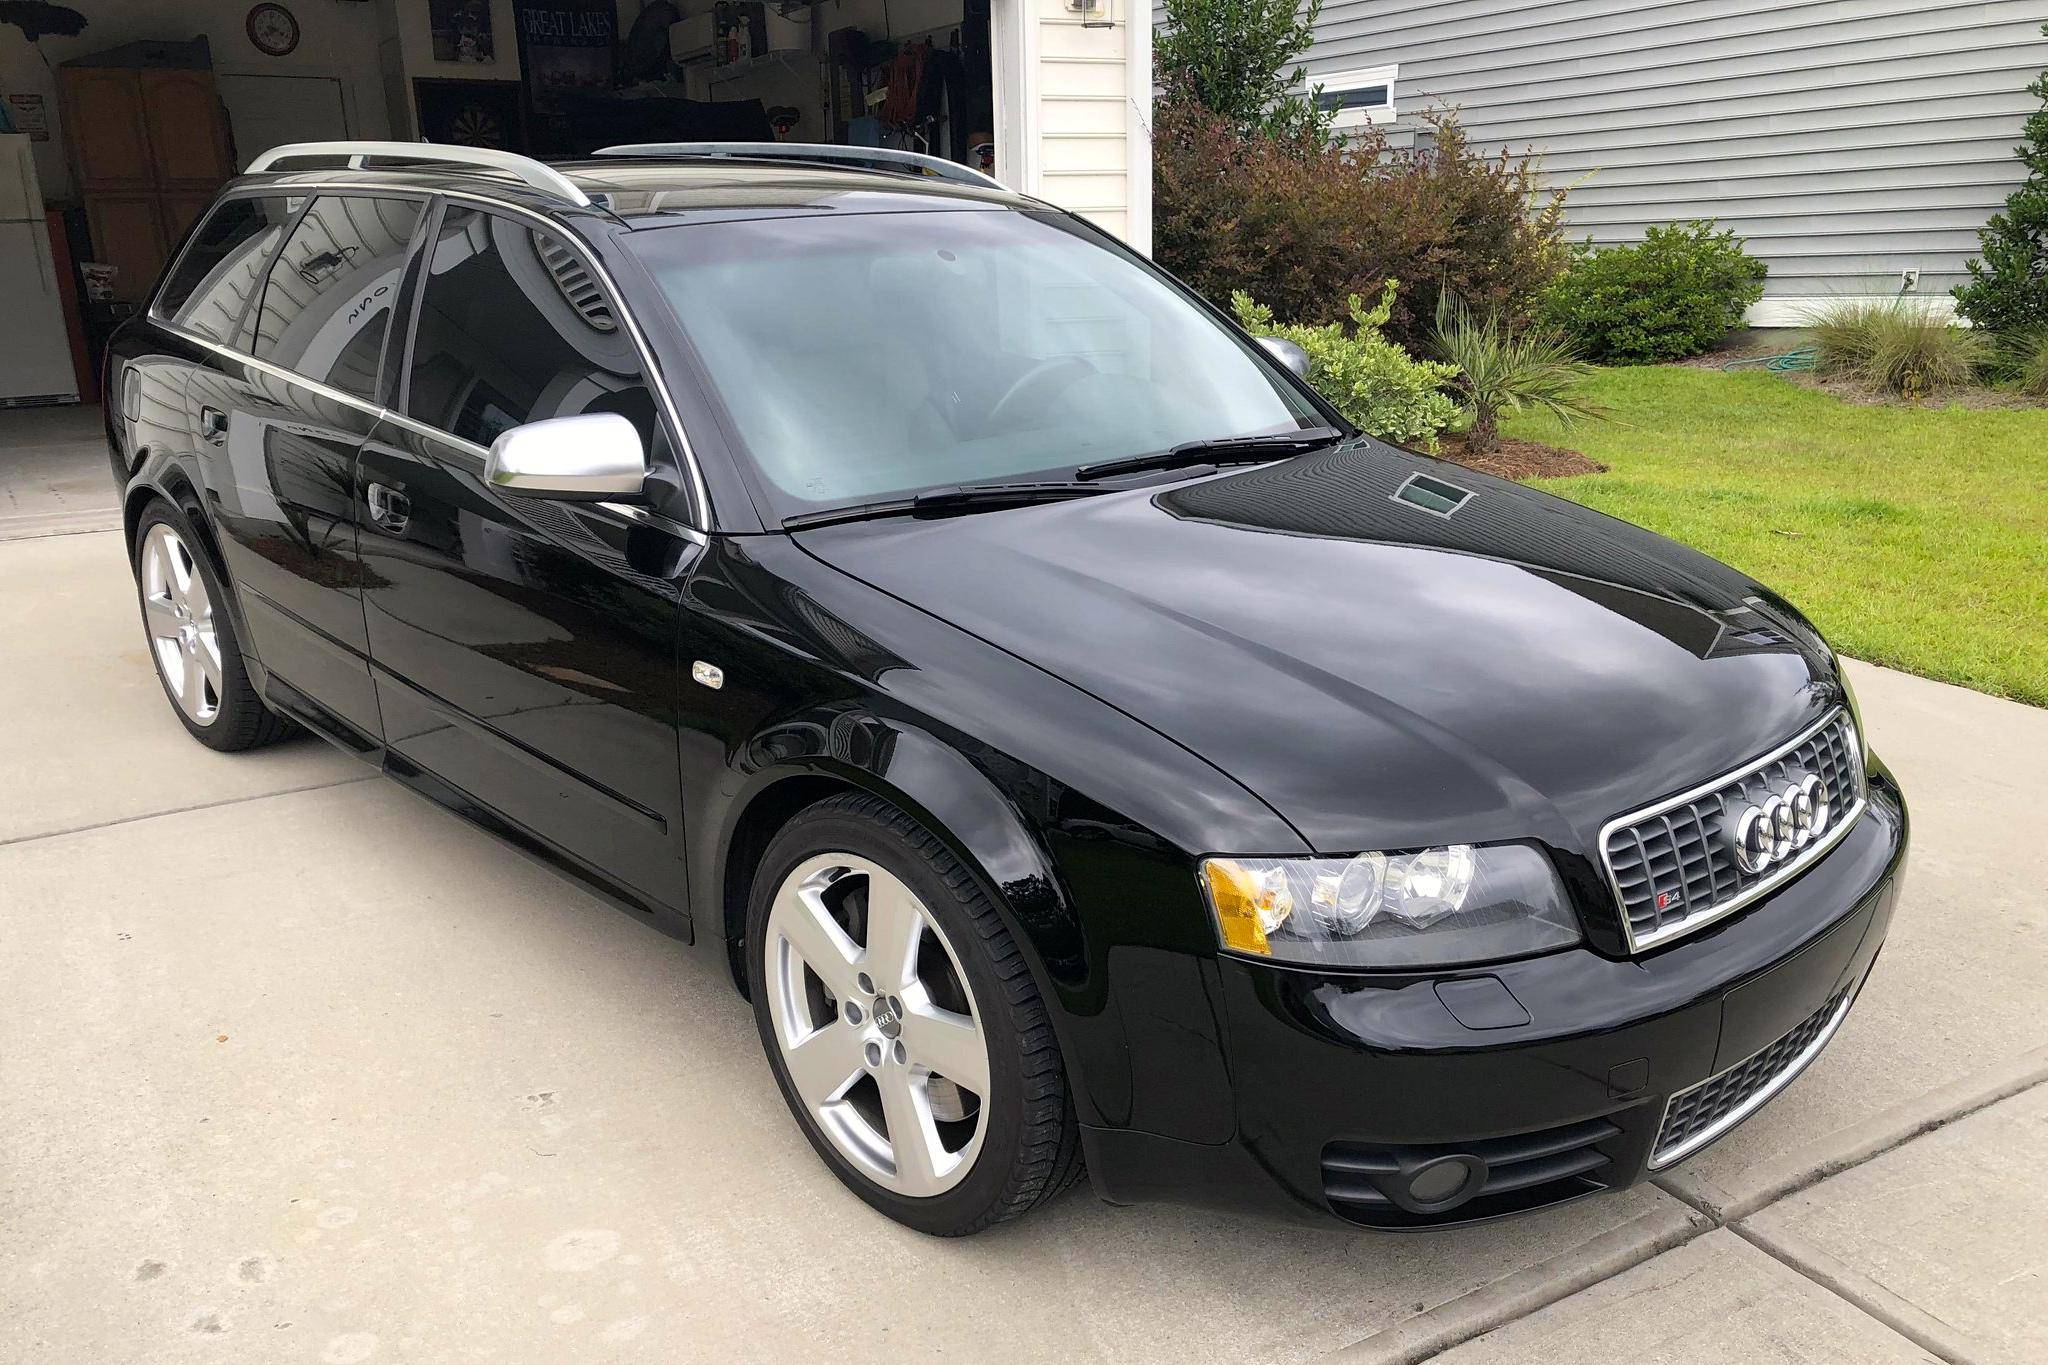 Audi B6 A4 and S4 Owners of San Antonio